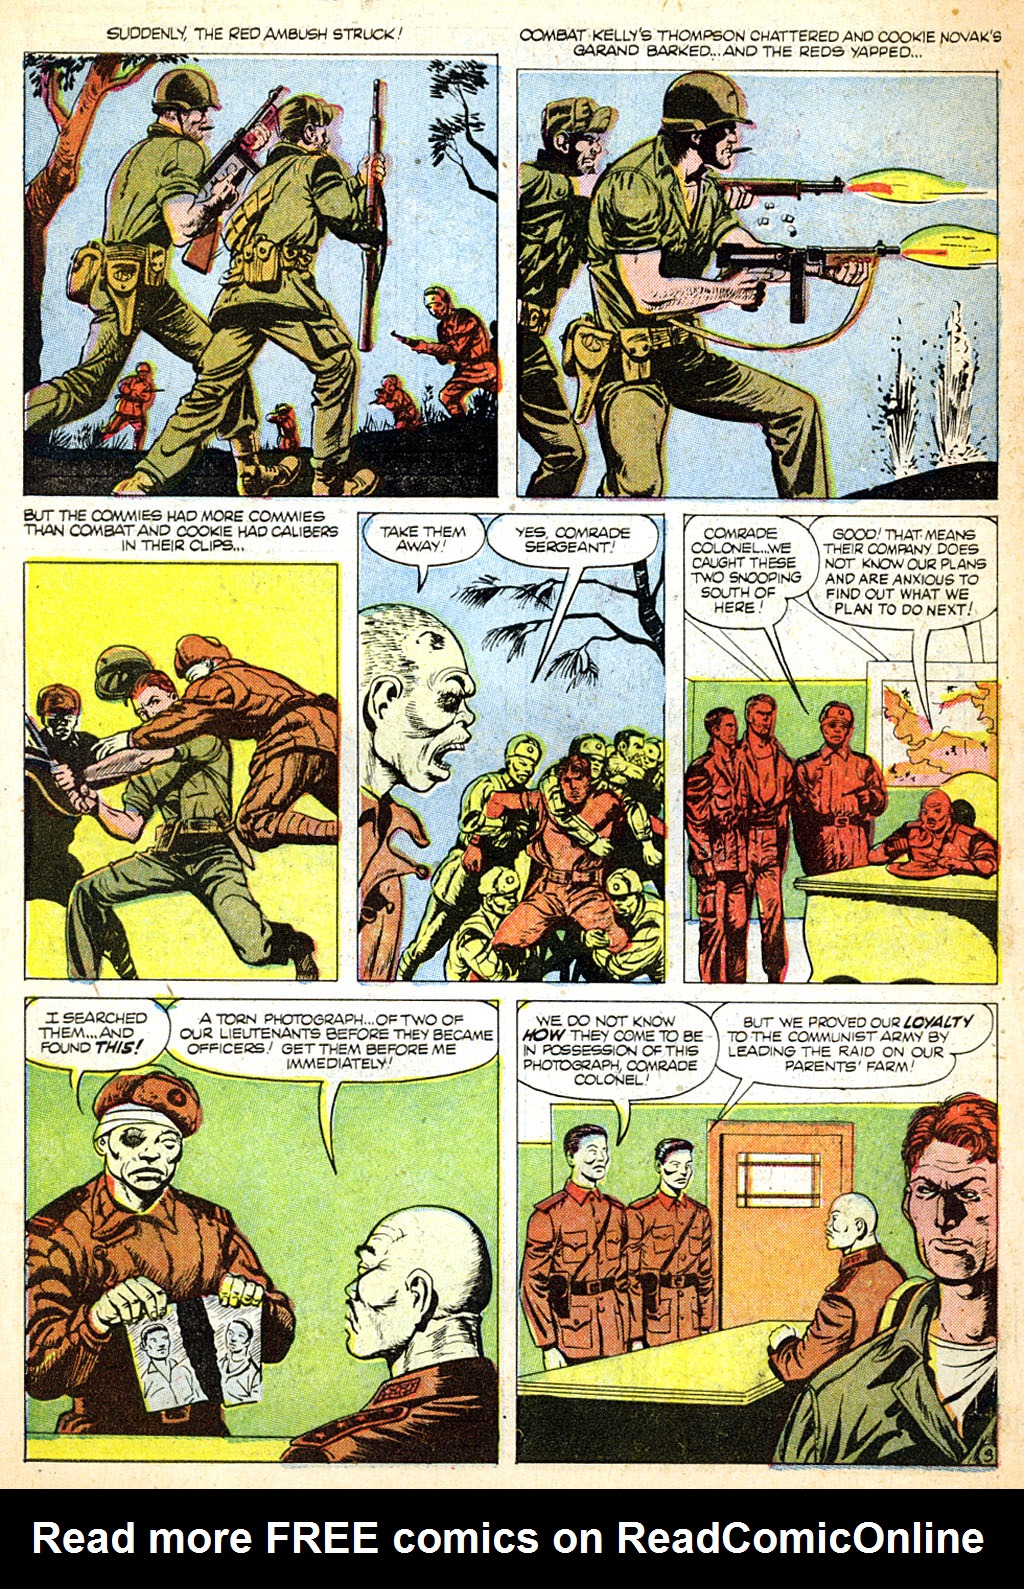 Read online Combat Kelly (1951) comic -  Issue #44 - 30